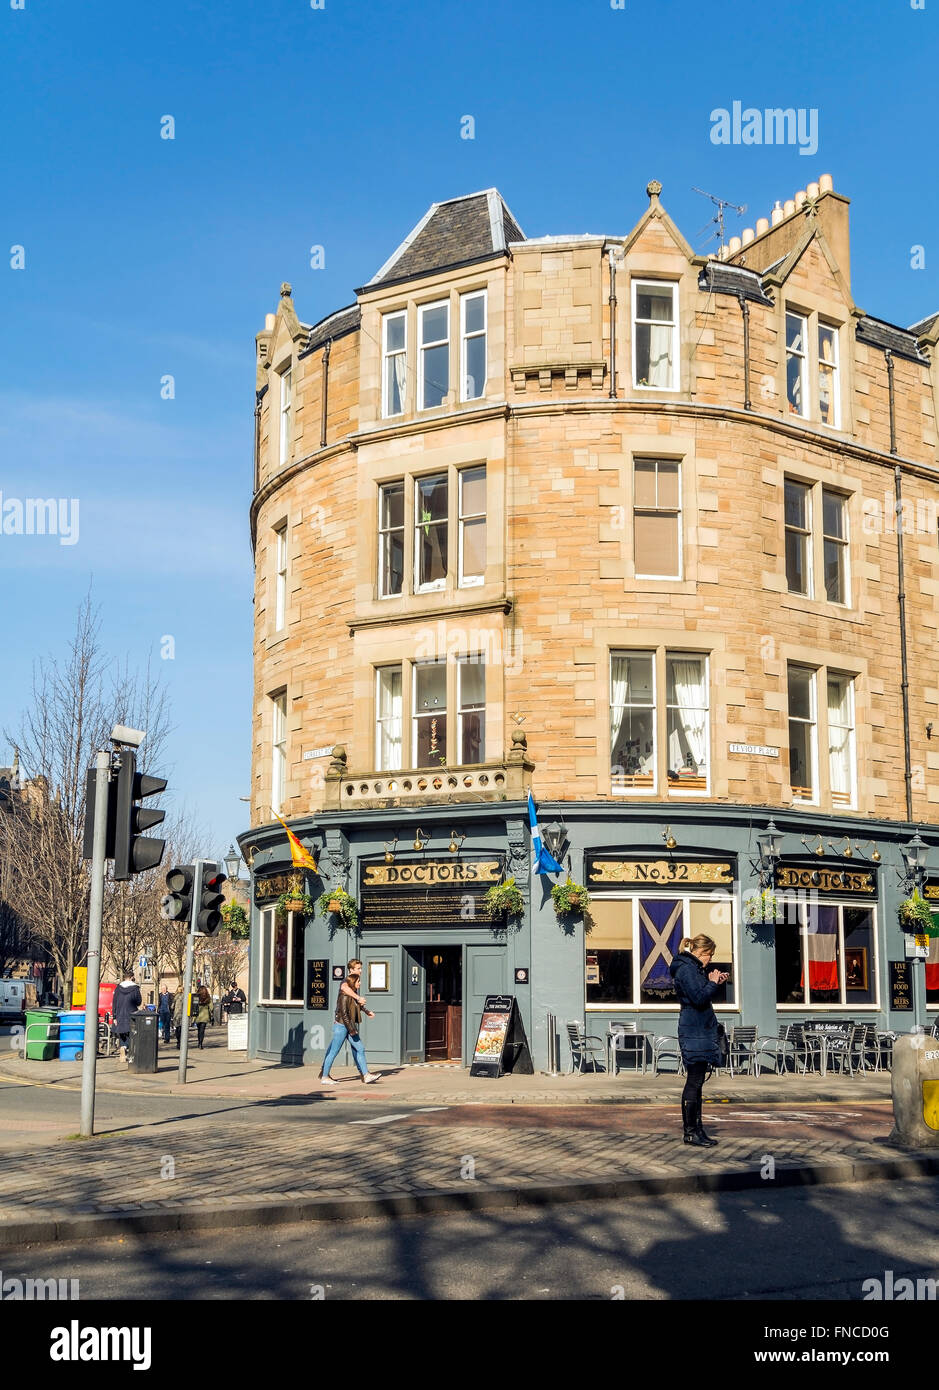 The well known Edinburgh pub 'Doctors' on the corner of Forrest Road, opposite the former medical school and Royal Infirmary. Stock Photo